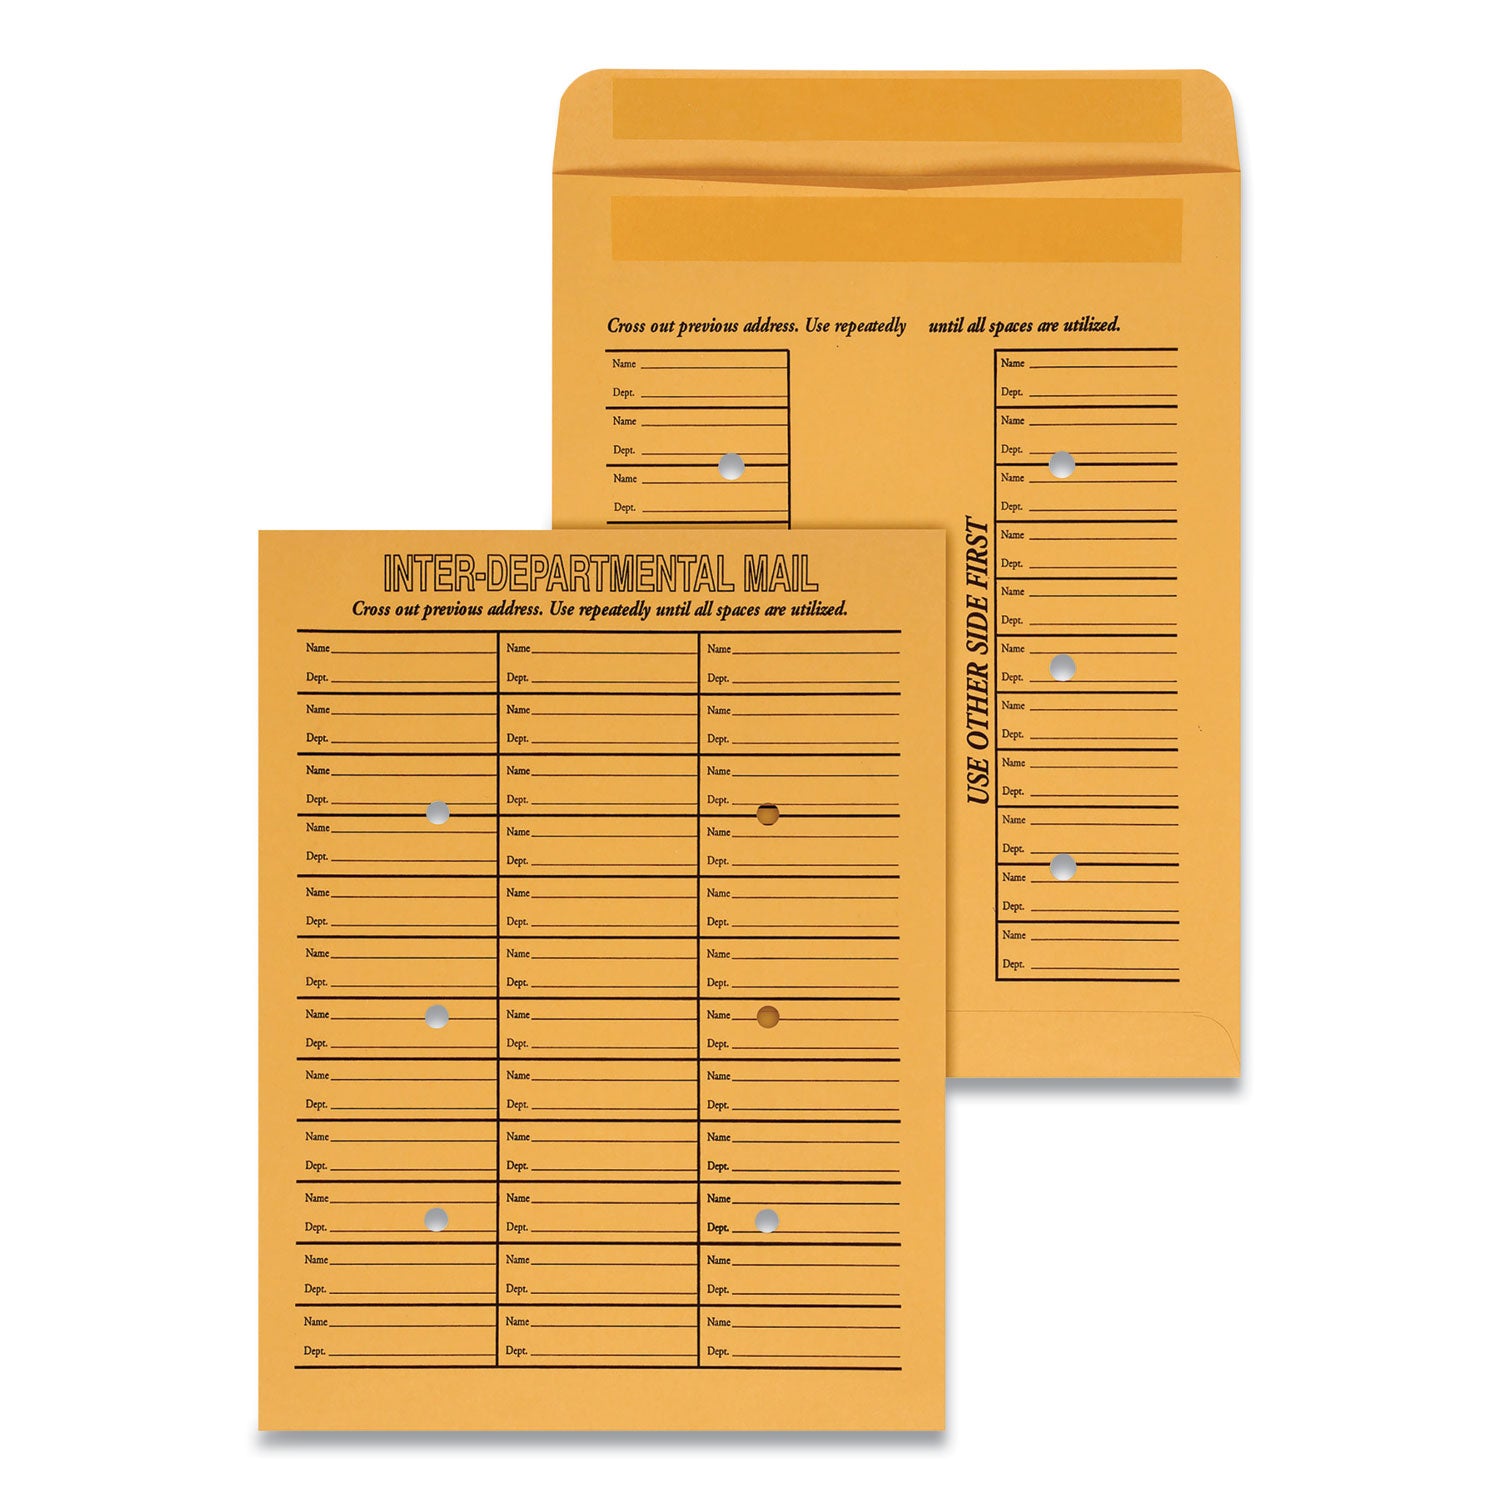 Deluxe Interoffice Press and Seal Envelopes, #97, Two-Sided Three-Column Format, 10 x 13, Brown Kraft, 100/Box - 